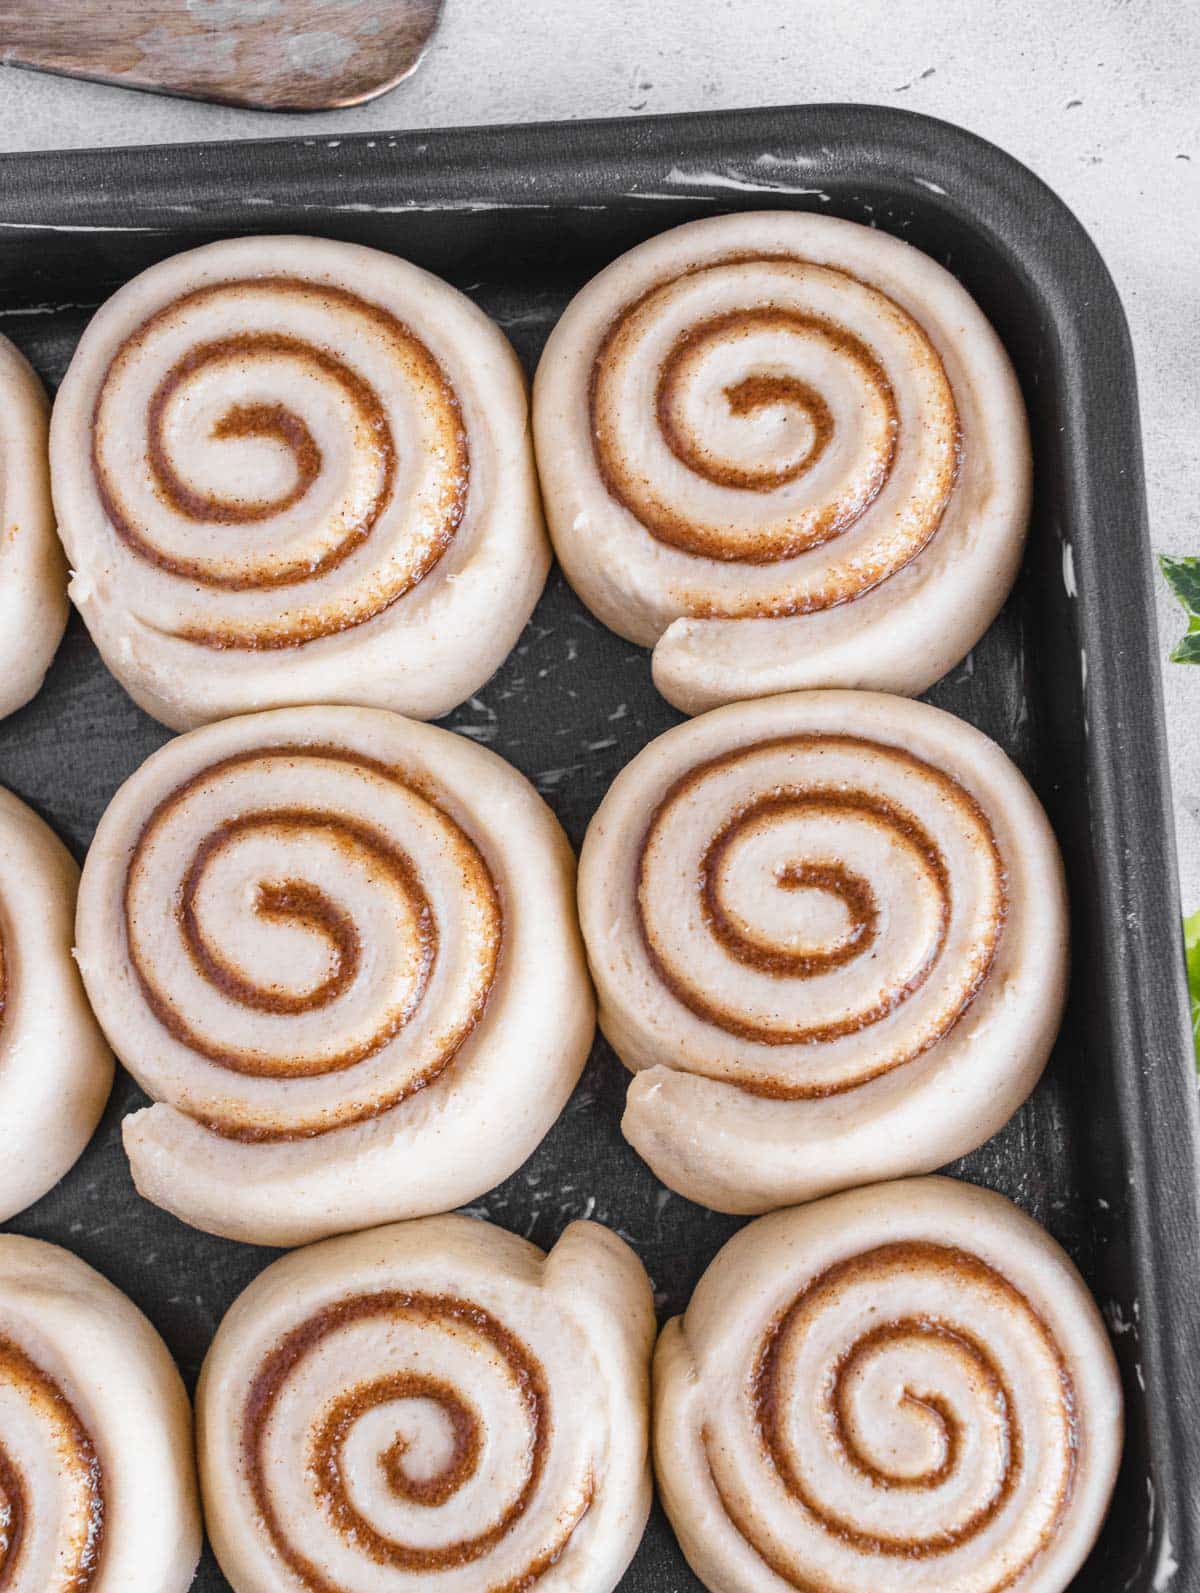 9 rolls in a squared baking tray before baking